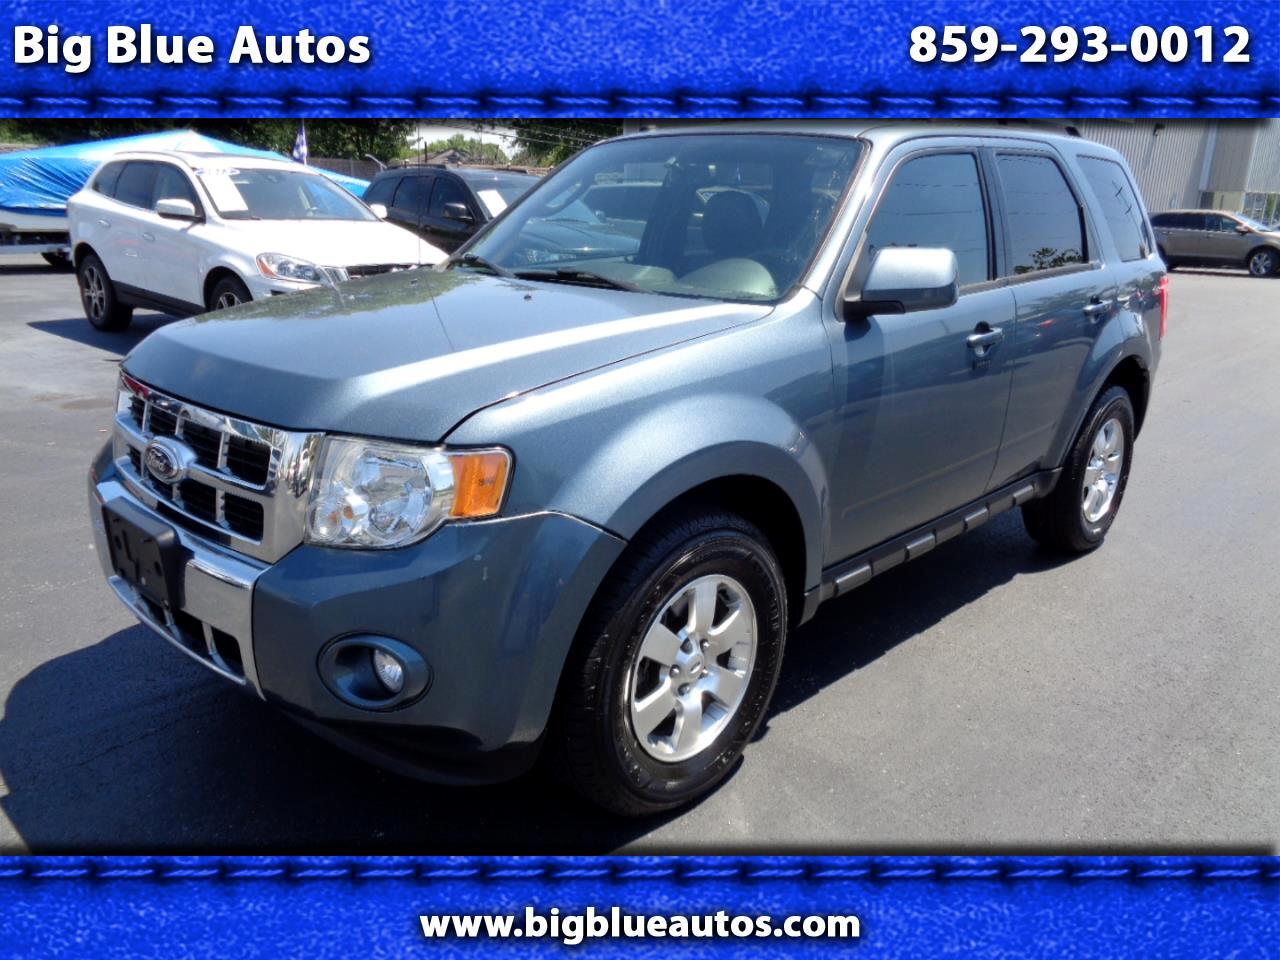 Used 2012 Ford Escape FWD 4dr Limited for Sale in Lexington KY 40505 ...